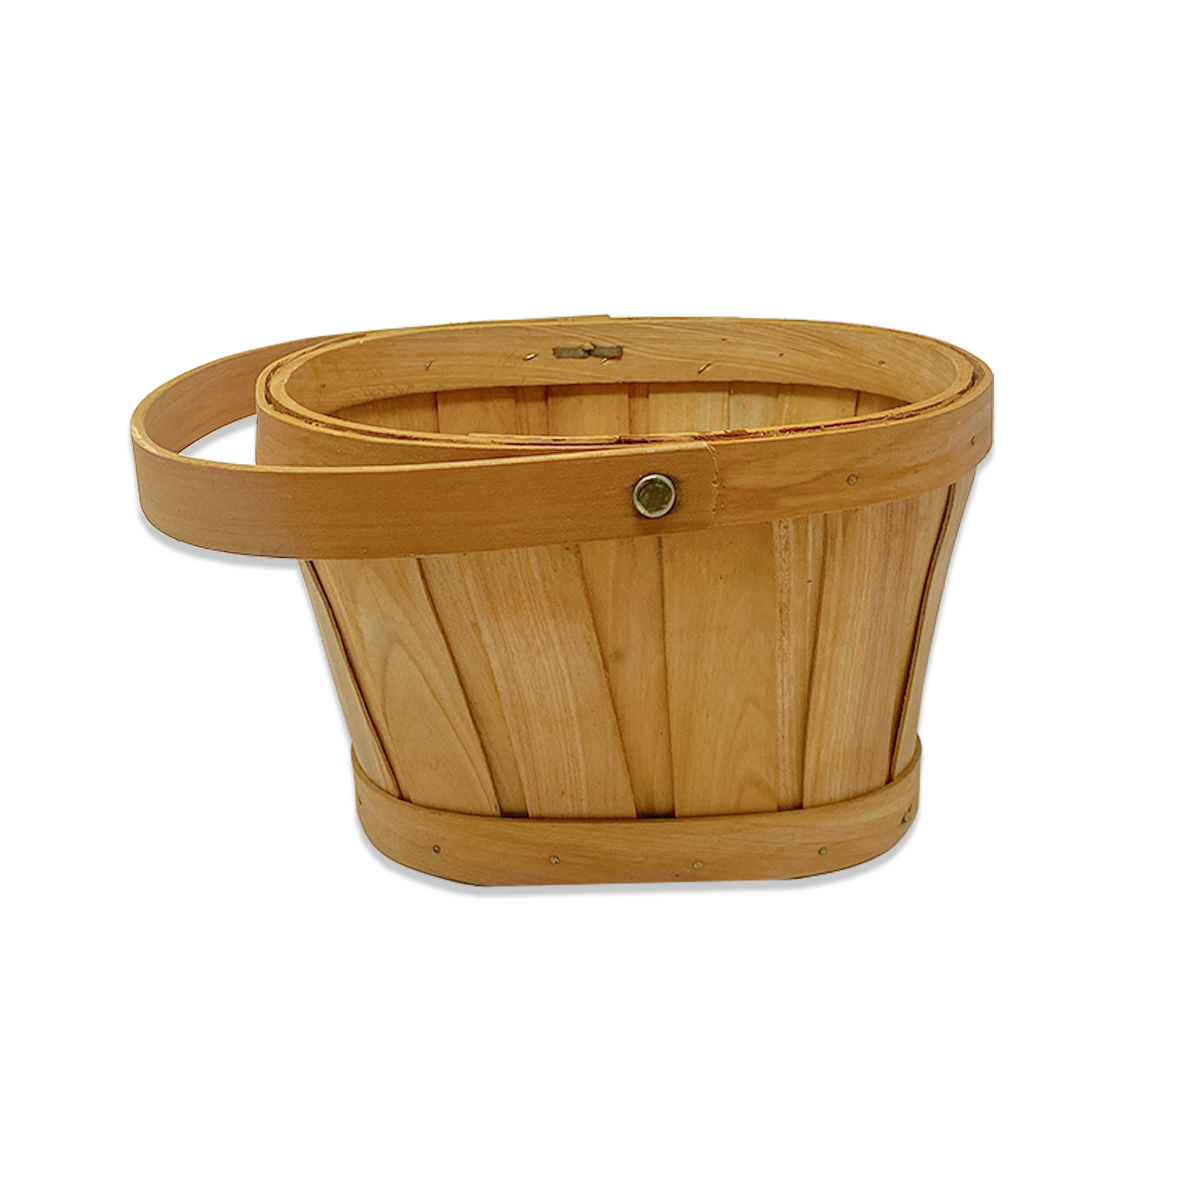 Oval Woodchip Handle Basket - Light Brown Stain 8 in